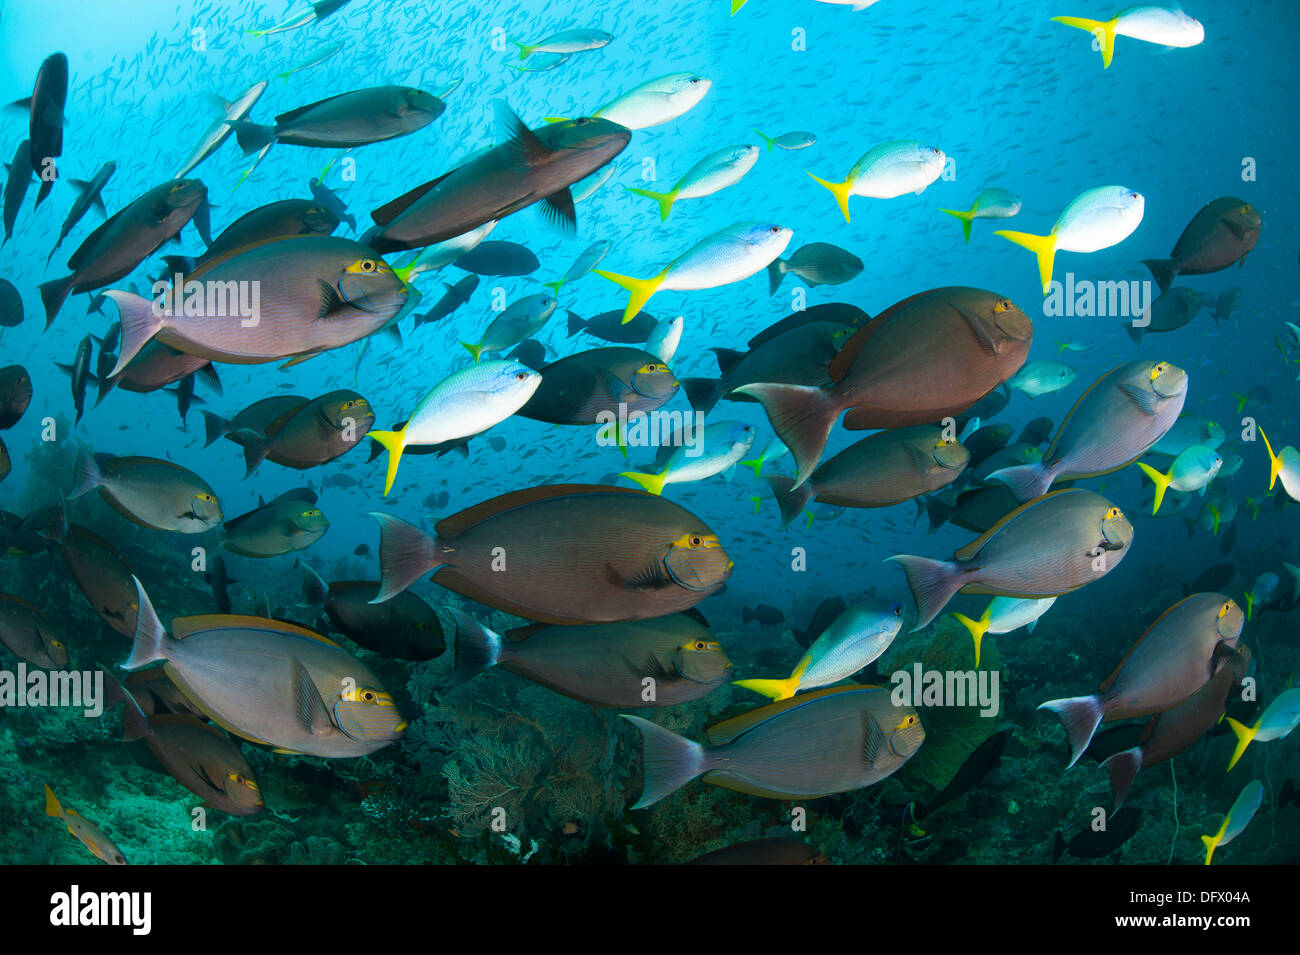 Schooling yellowmask surgeonfish with blue and yellow fusilier fish. Stock Photo